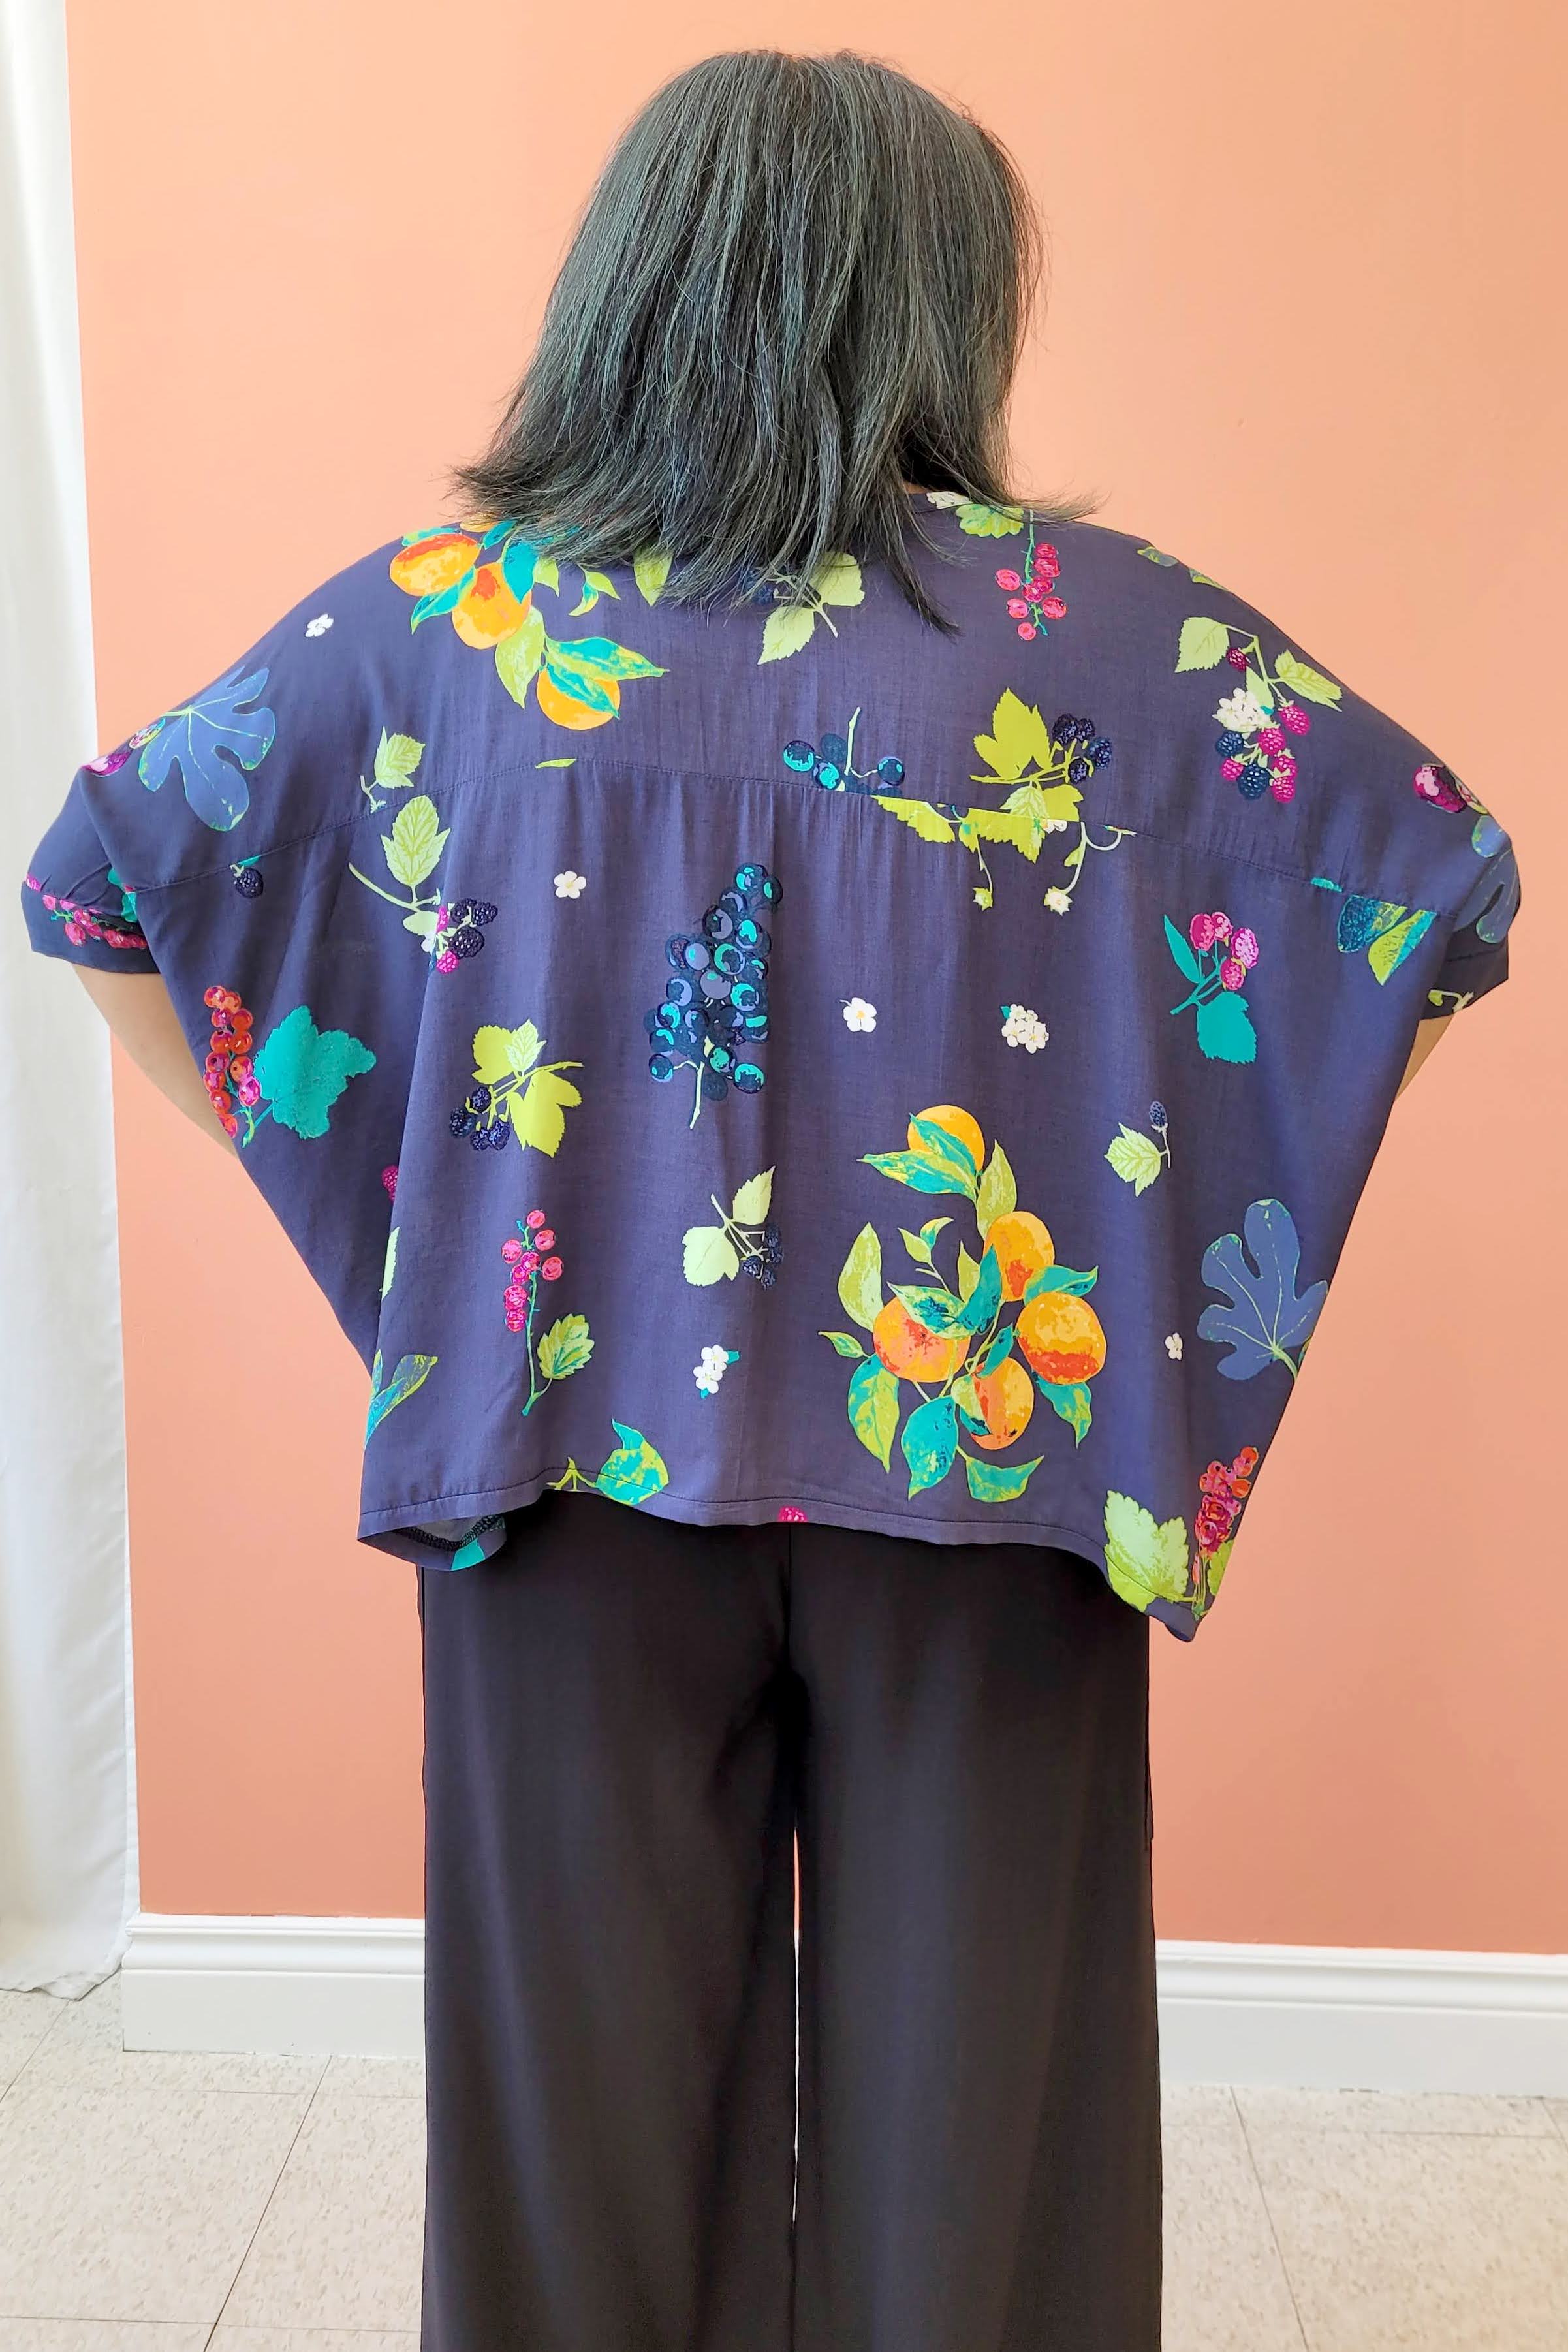 Chloe Top by Desserts and Skirts, Multi-fruit, back view, round neck, bat-wing sleeve, viscose, sizes XS to XL, made in Toronto